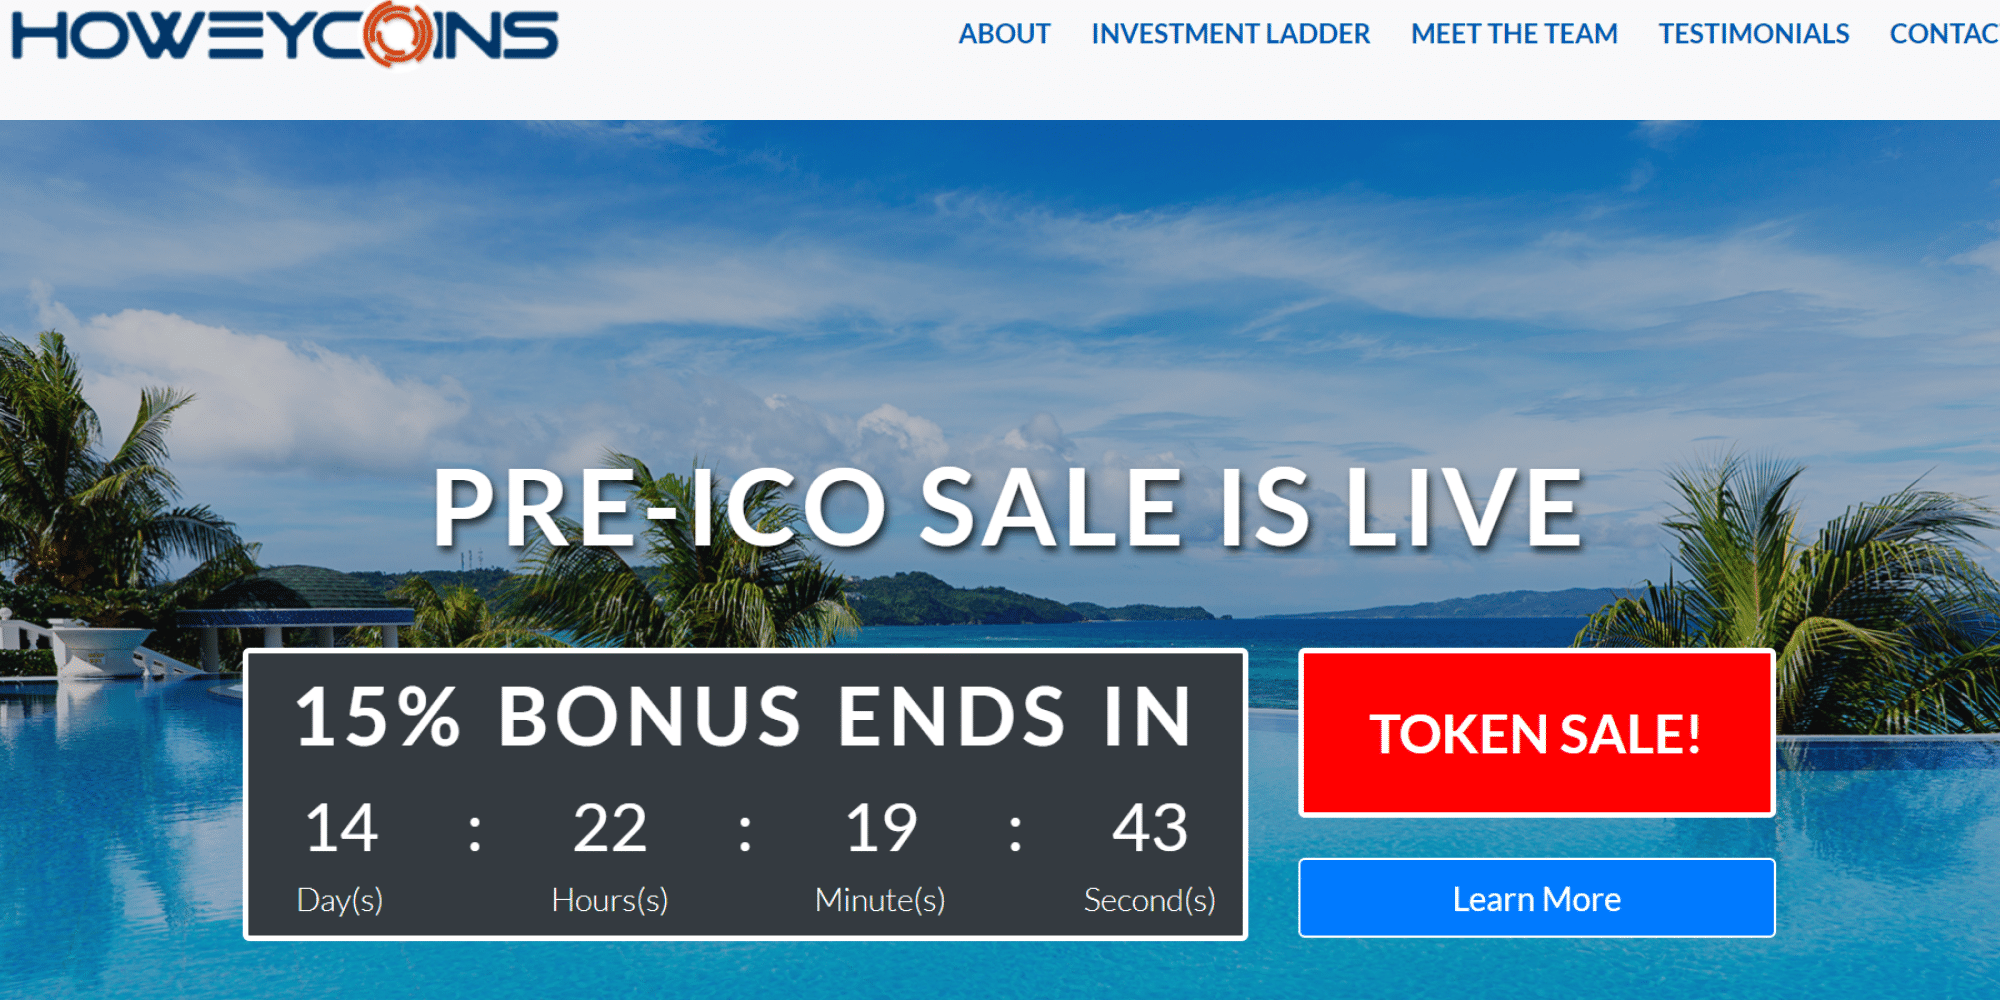 Howey Coins was a fake ICO used by SEC to teach investors a lesson. This image is a screenshot of a Howey Coins pre-ICO token sale.